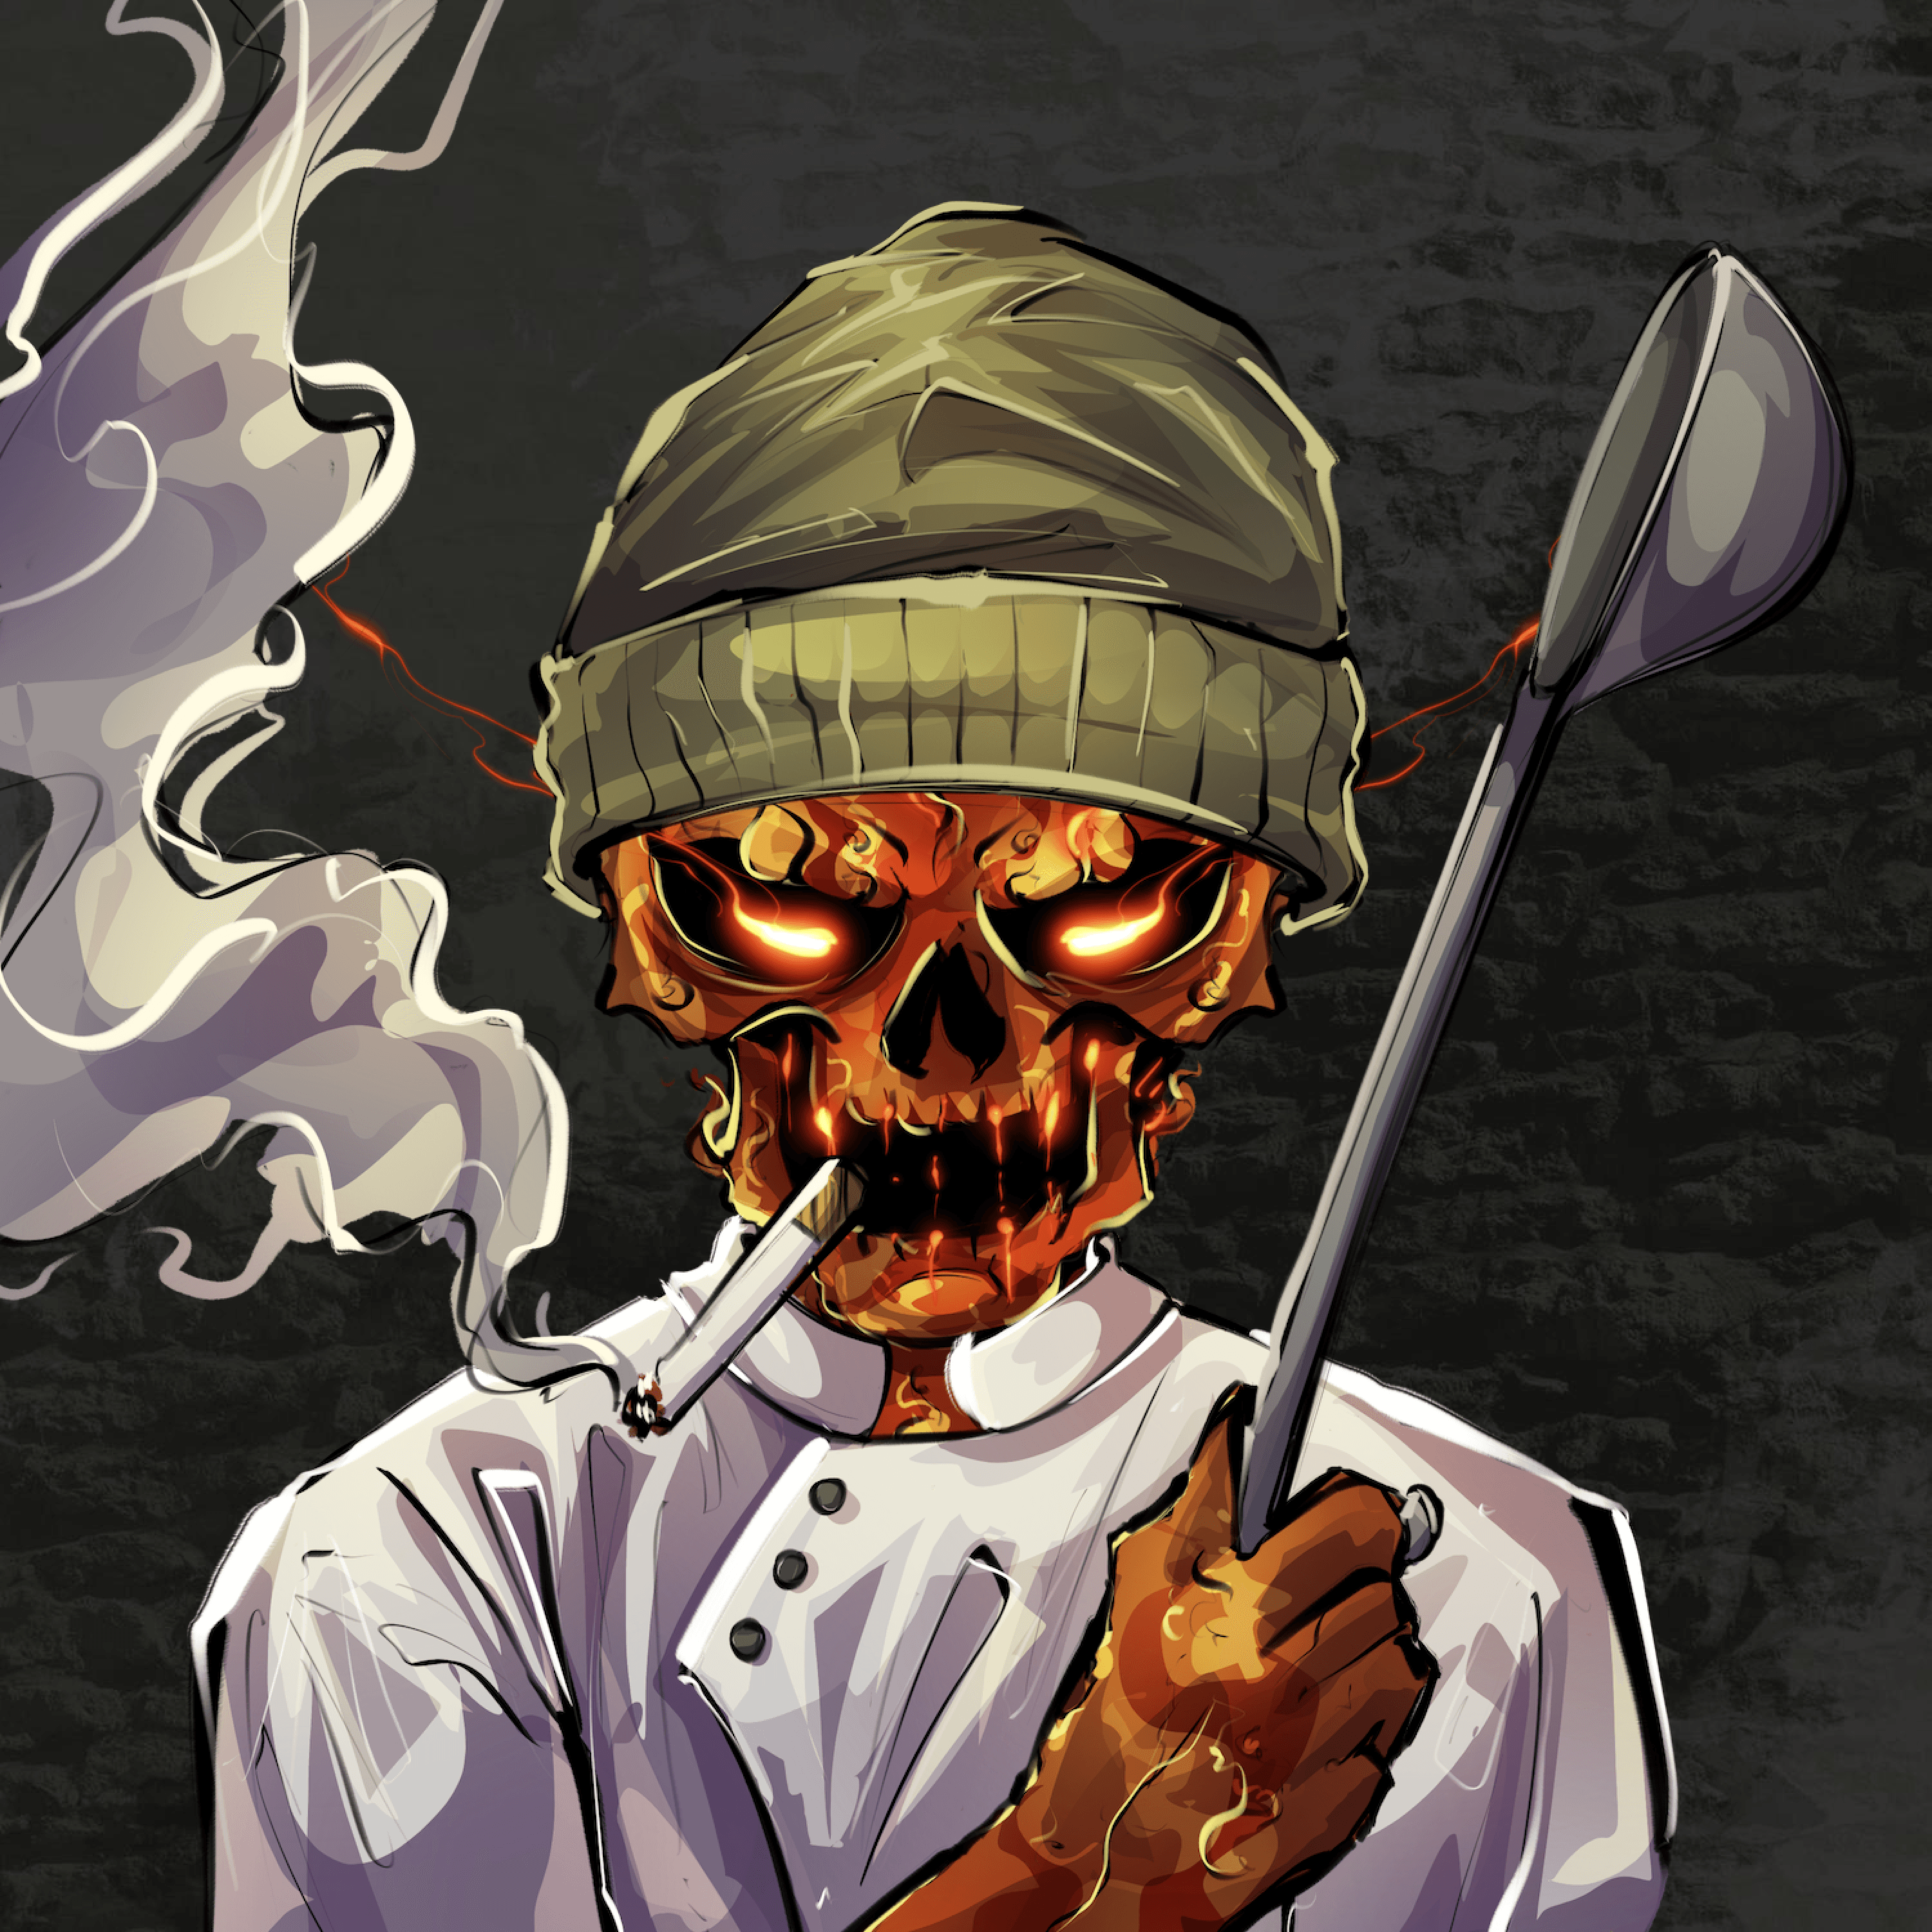 Undead Chefs #474